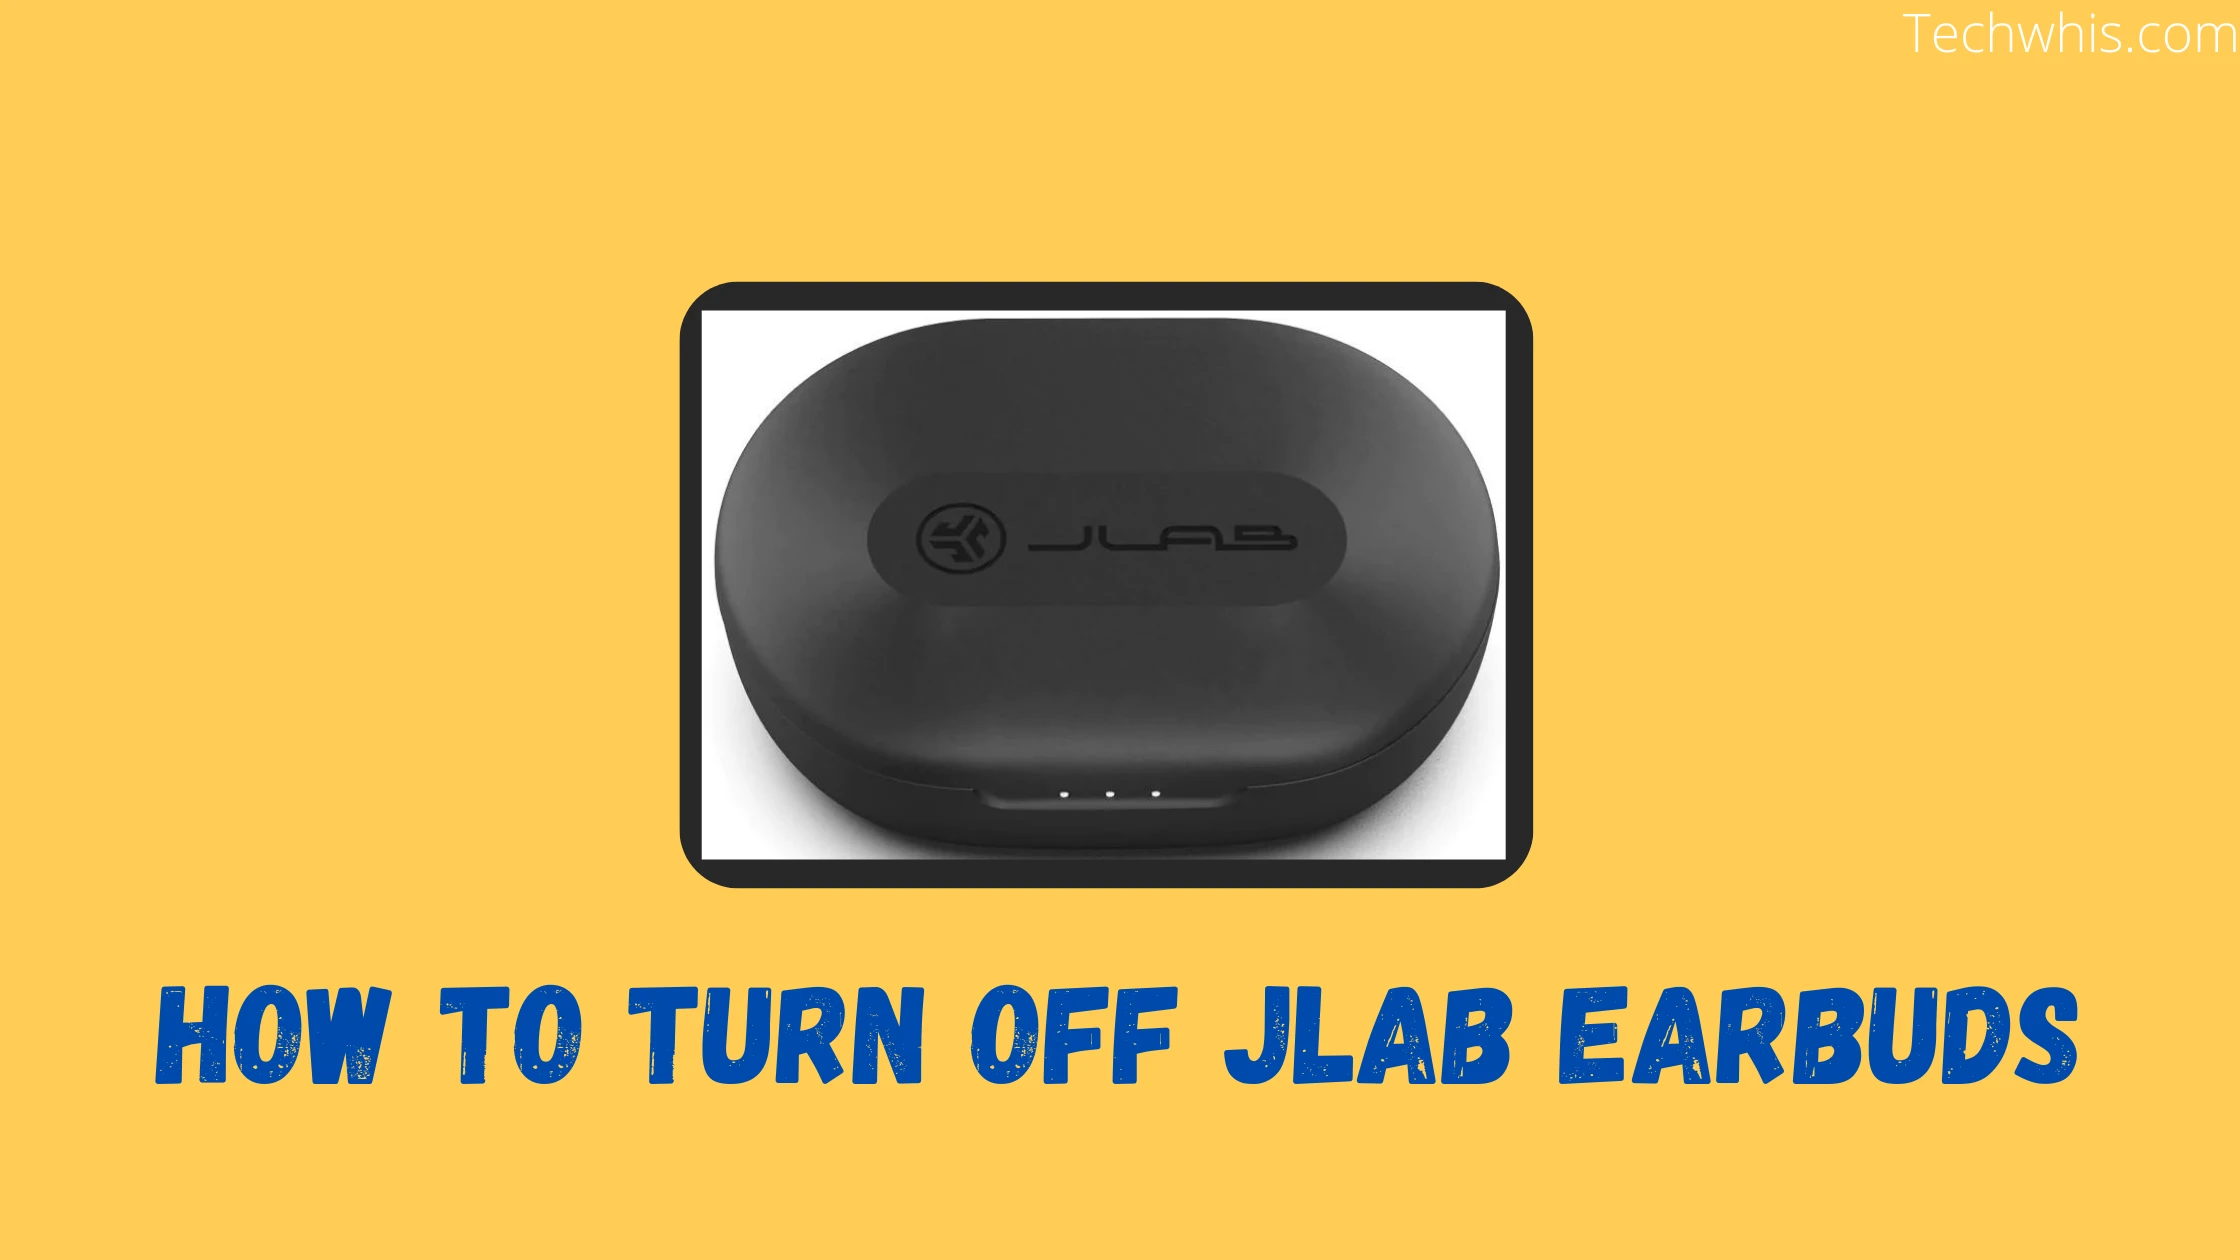 How to turn off jlab earbuds